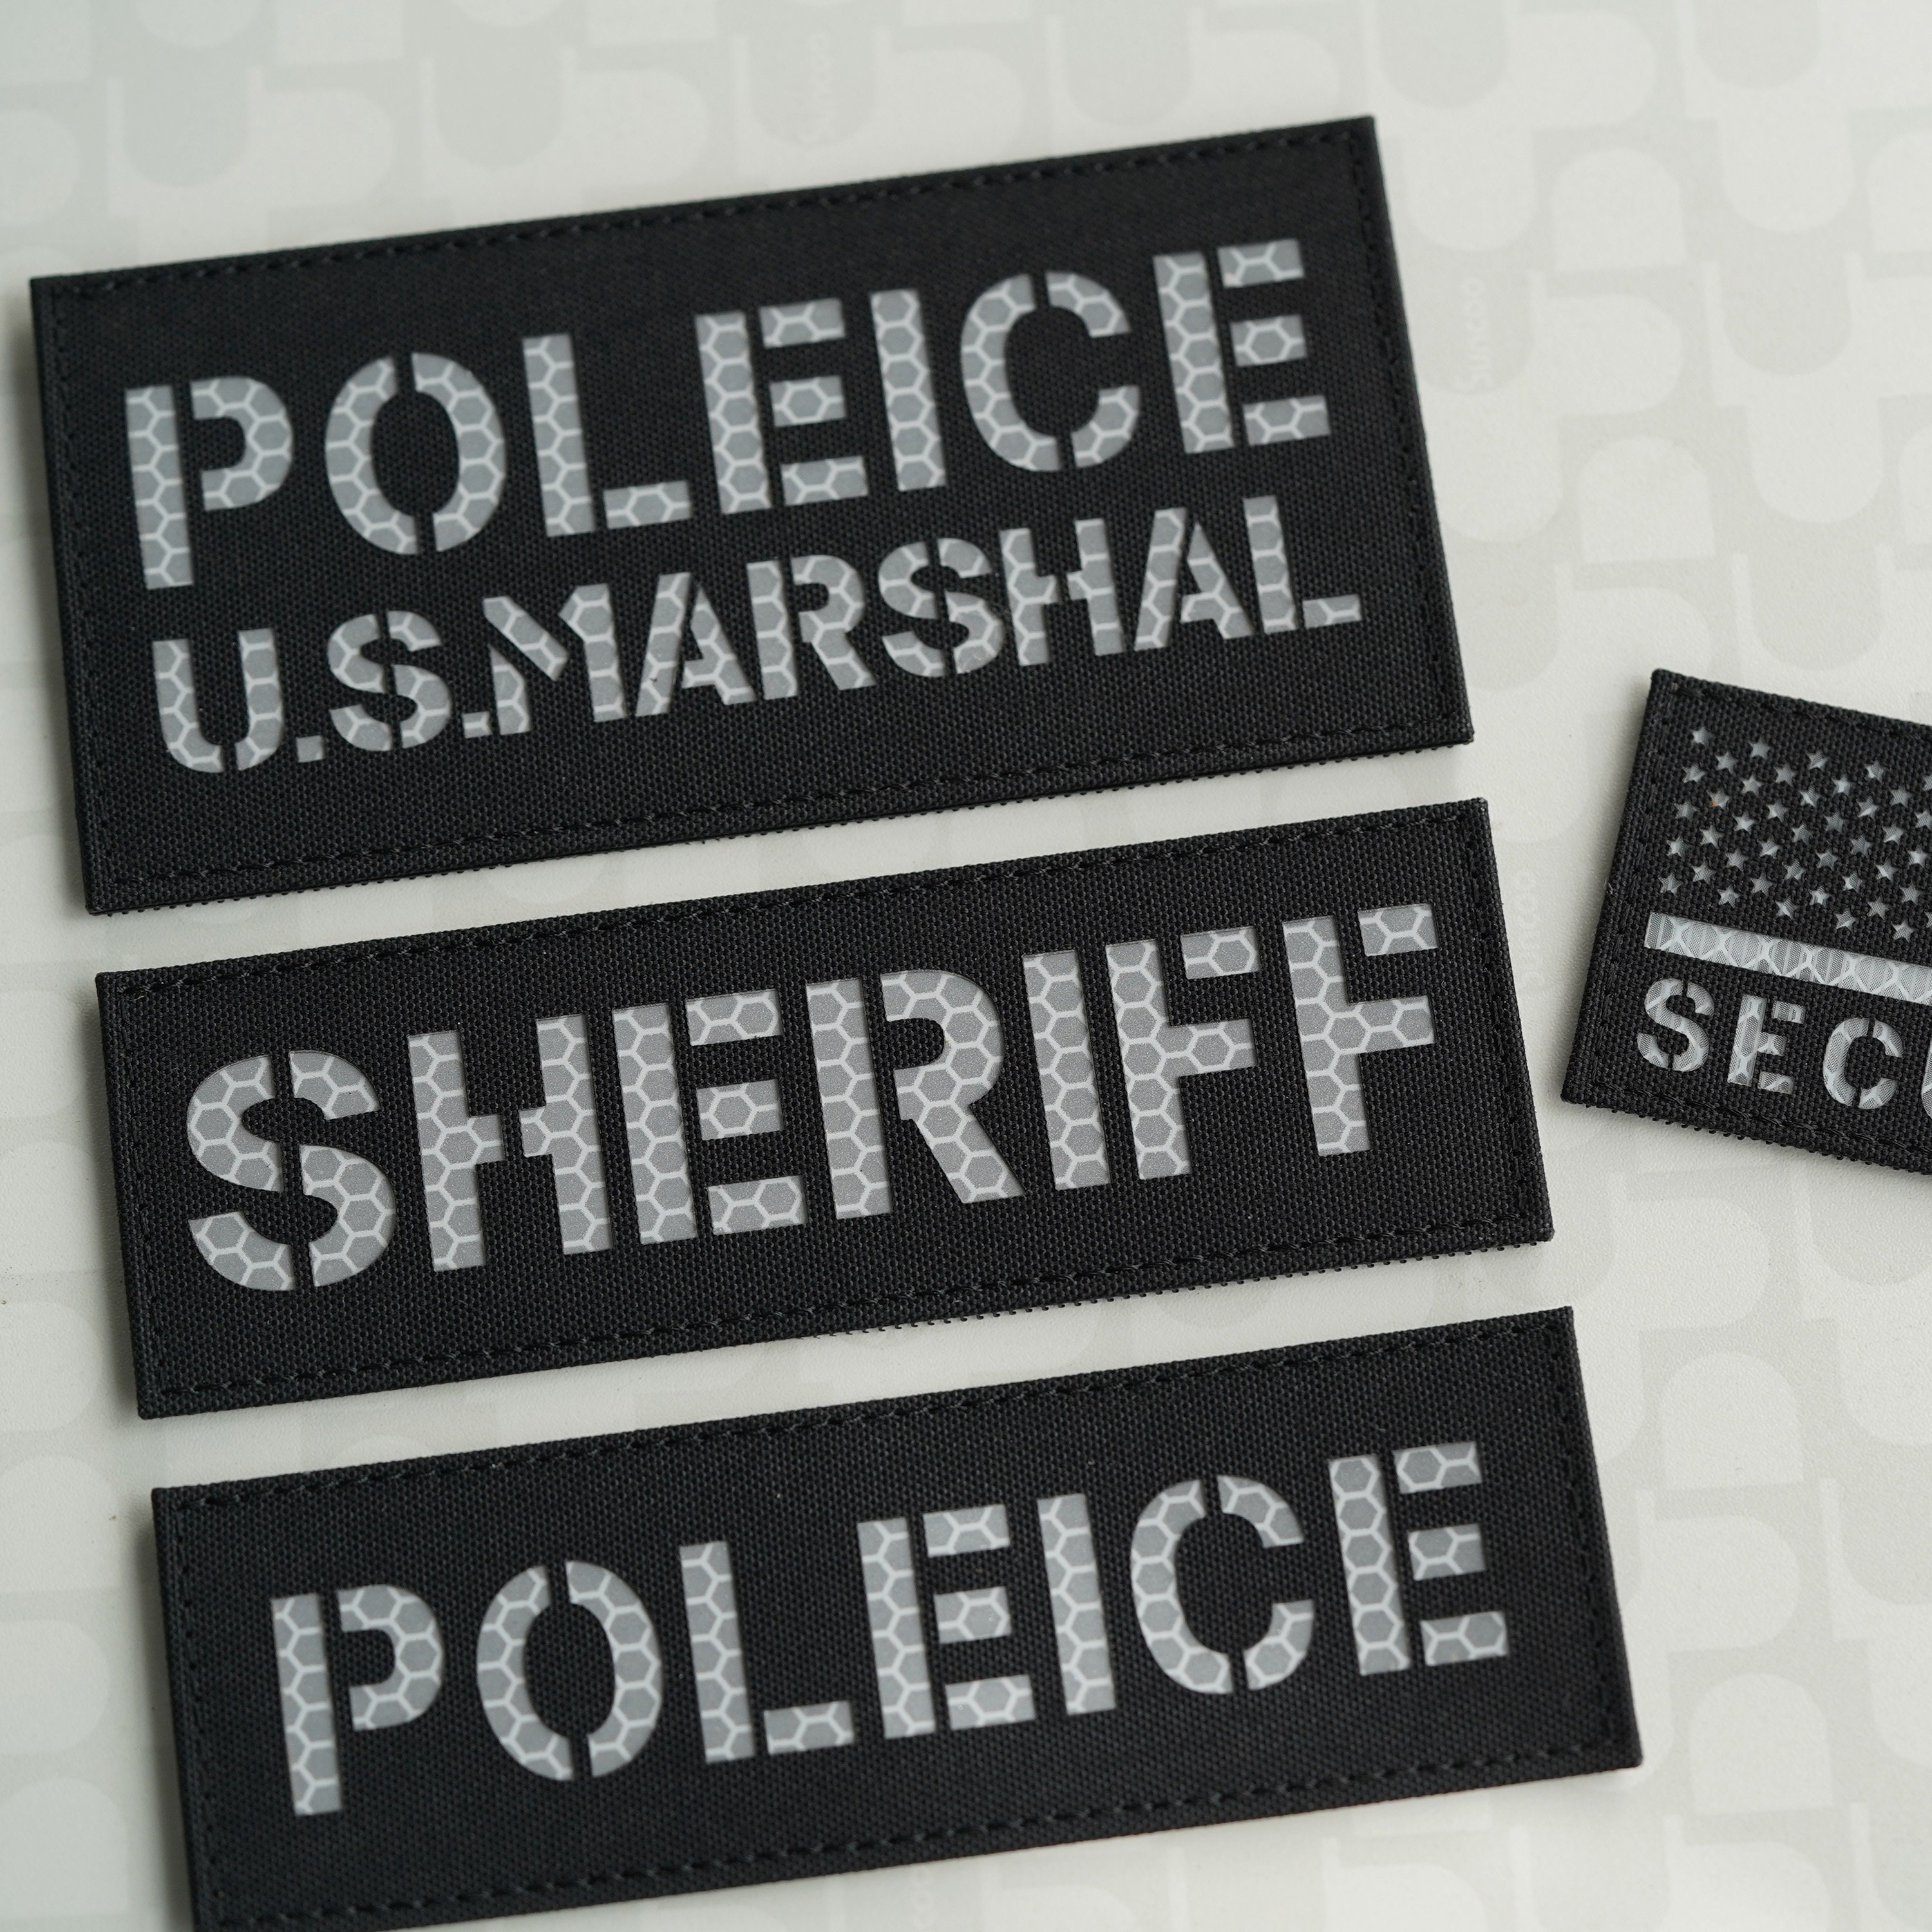 Ultra Reflective SHERIFF Patch Weather Resistant Tactical Patch for Vests,  Made to Last With Hook & Loop Backing FREE SHIPPING 